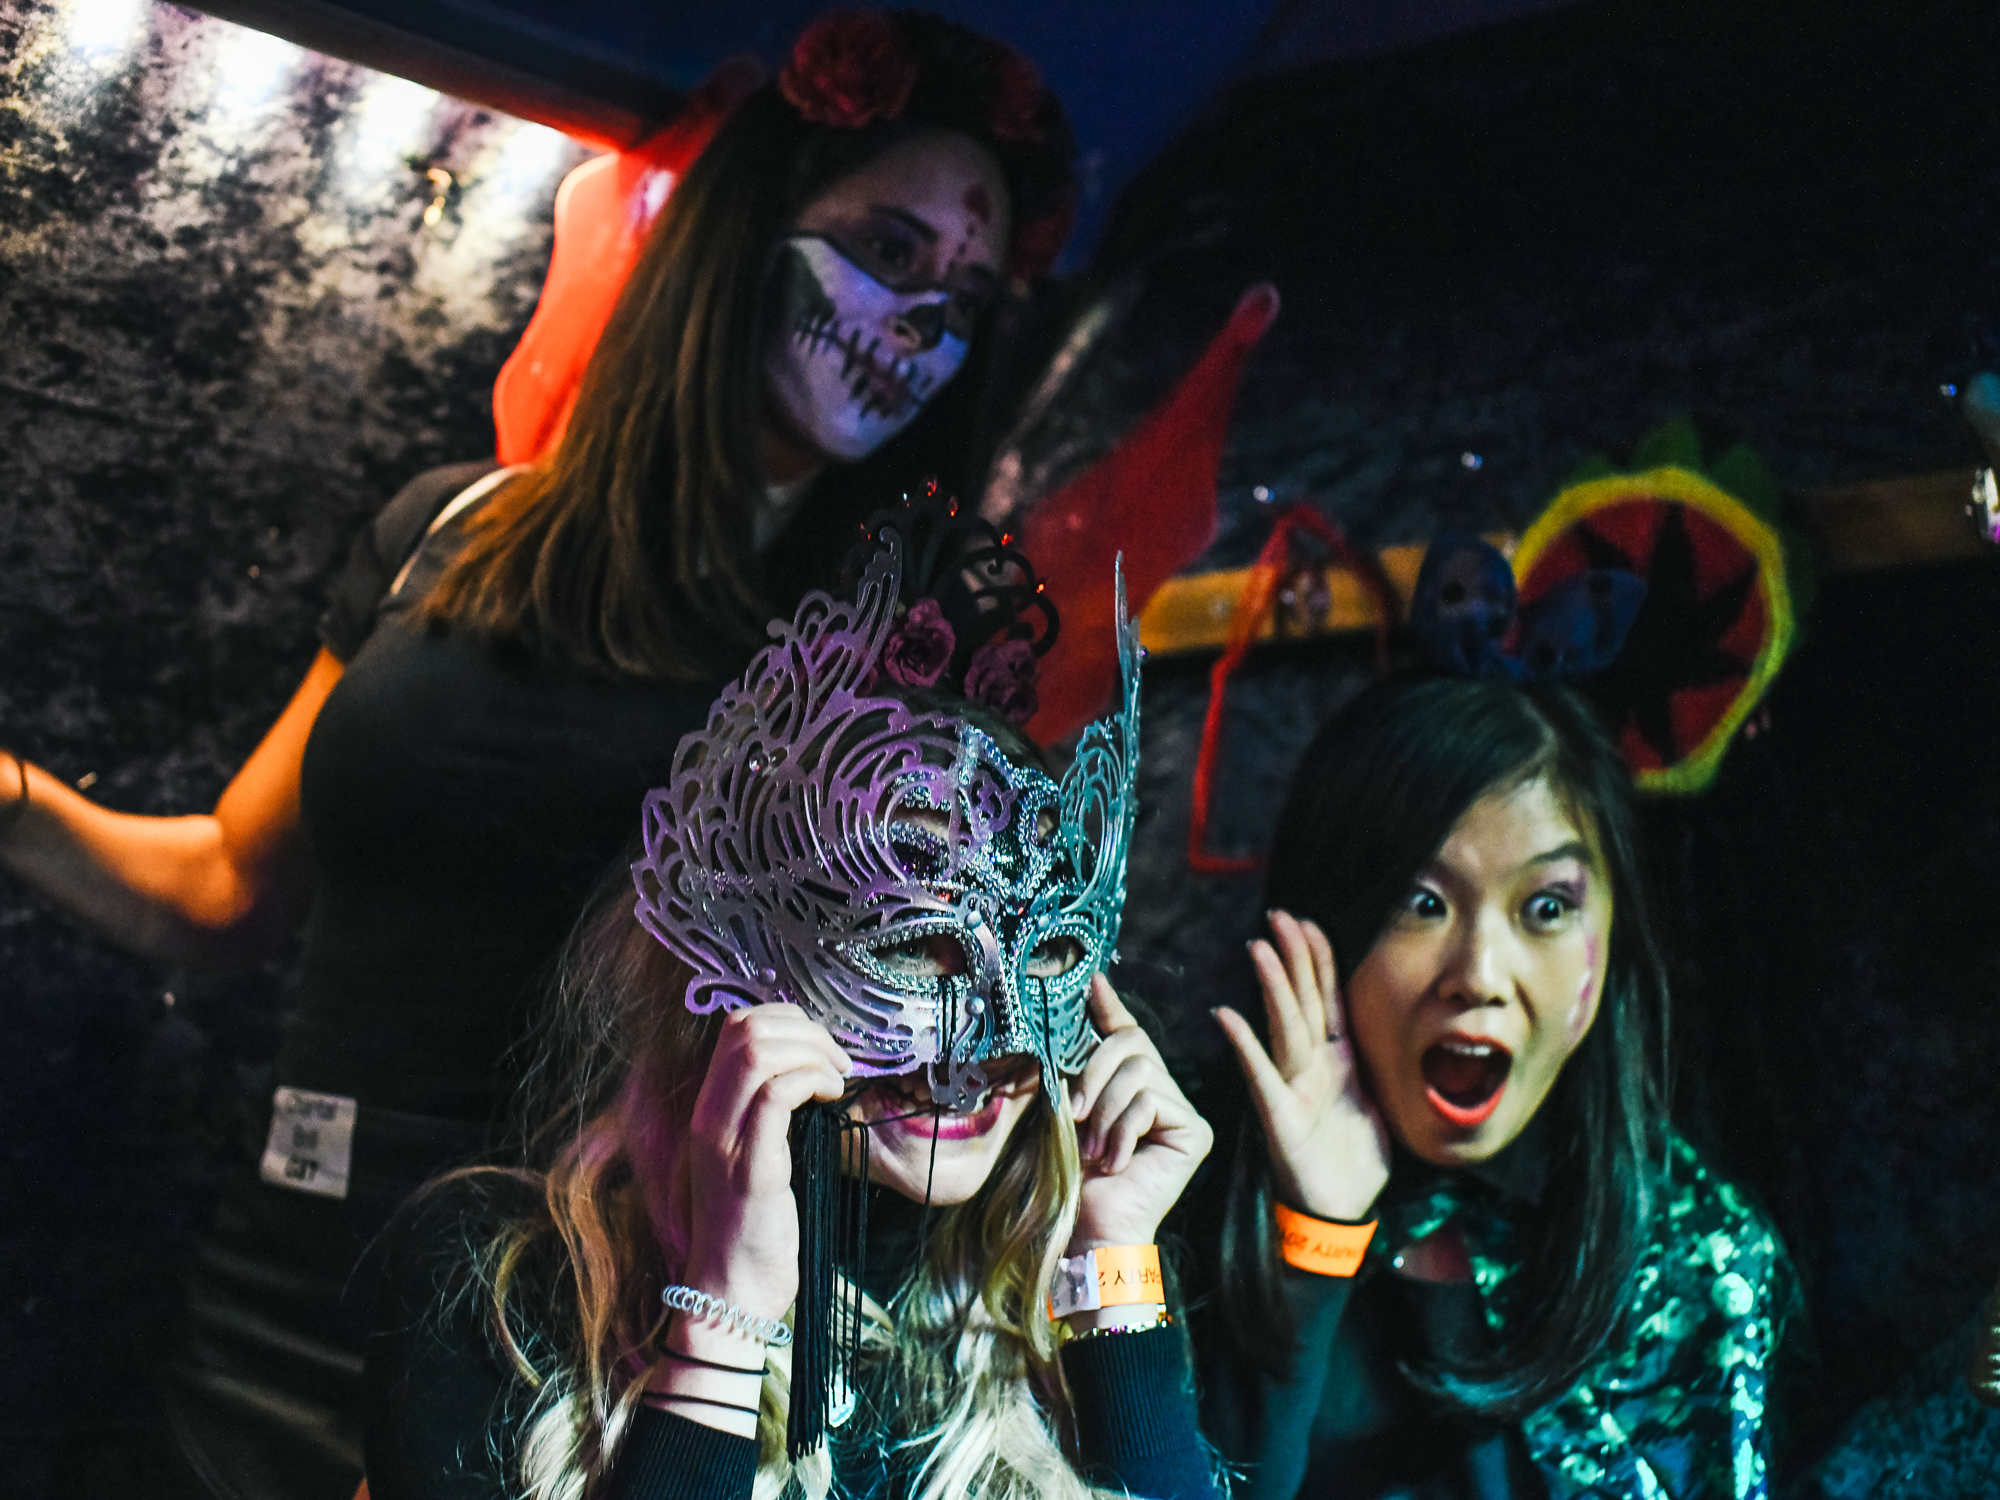 Three women, one in skeletal makeup holding a decorative mask, the other expressing surprise and delight at a party, and the last holding up a mardi gras mask.